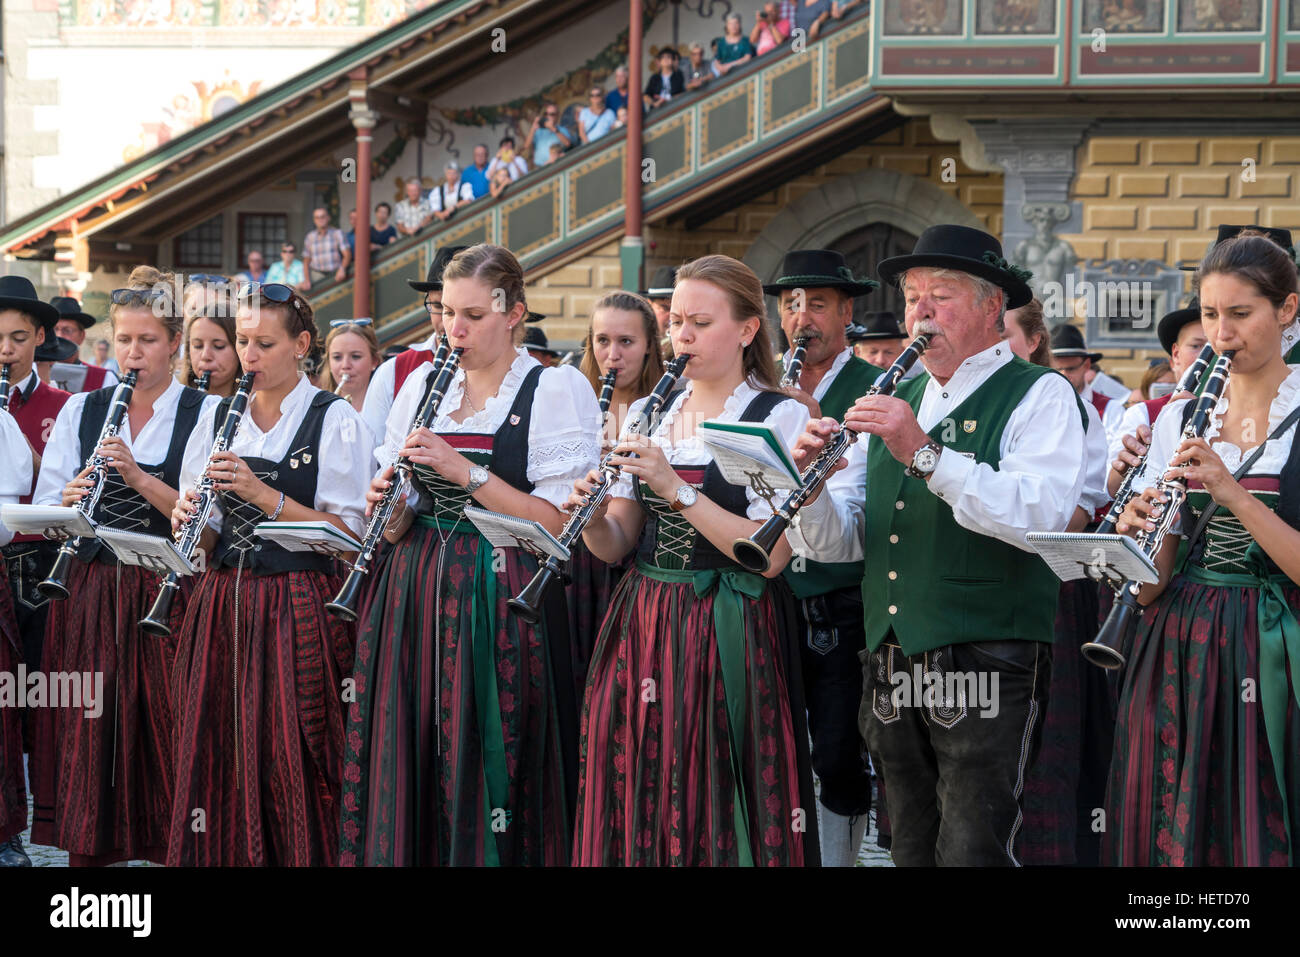 Parade with musical band in traditional costumes, Lindau, Lake Constance, Bavaria, Germany, Europe Stock Photo